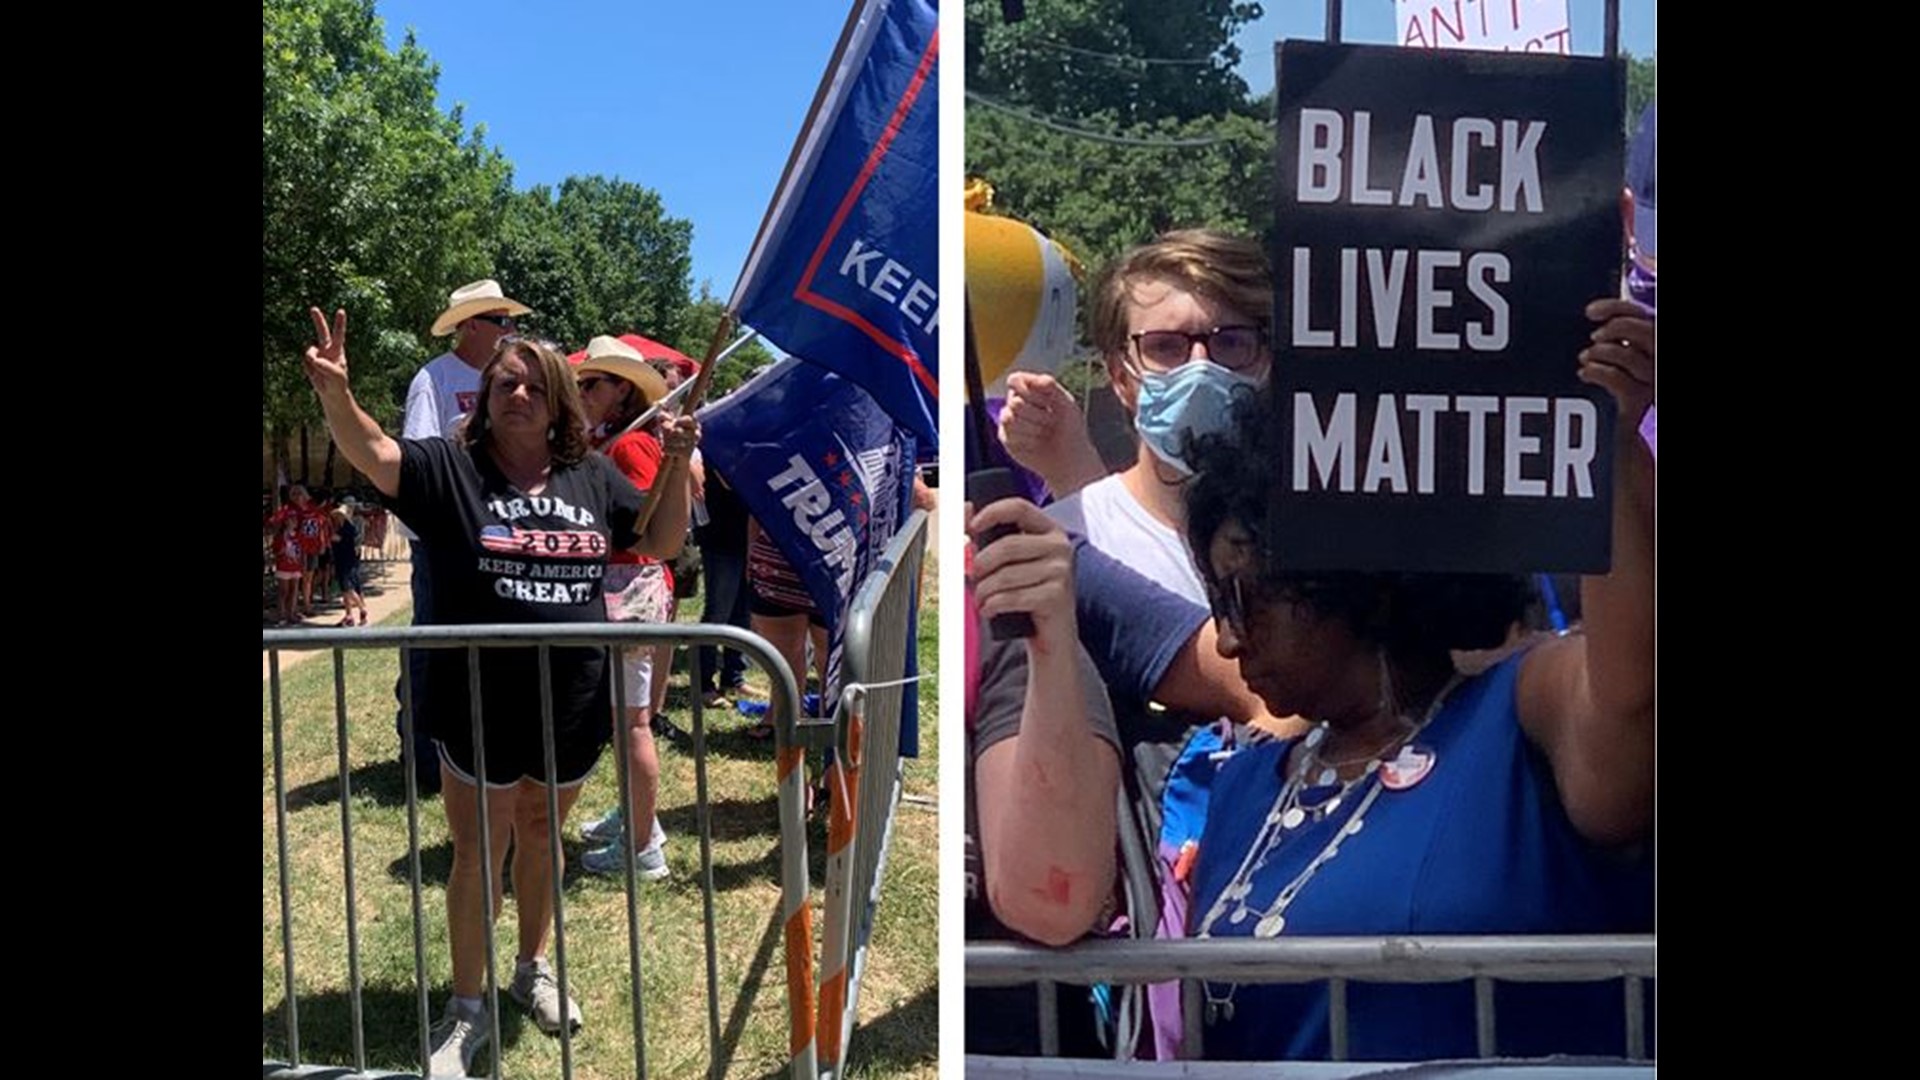 Protesters and supporters of President Trump shouted at each other outside Gateway Church in Dallas as the president held a roundtable to discuss policing.